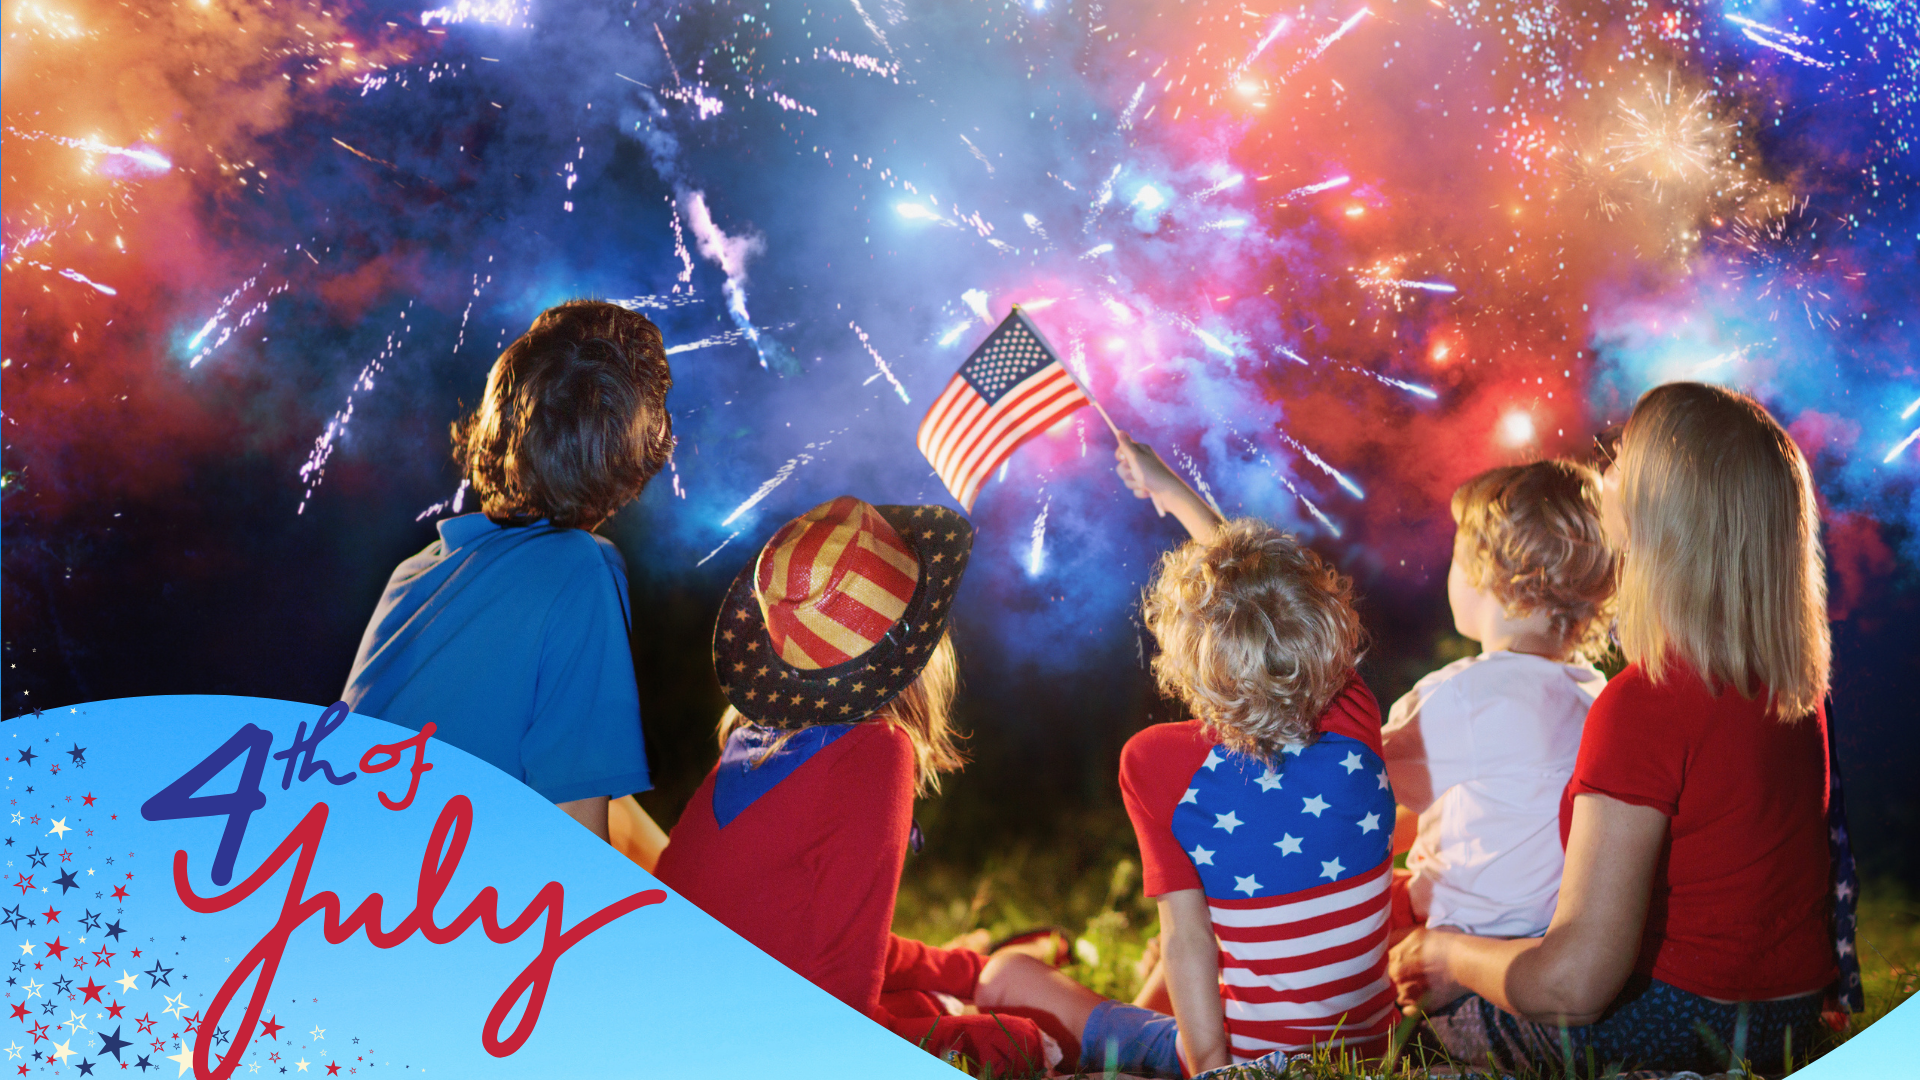 The 4th of July: America’s Original Experiential Marketing Activation